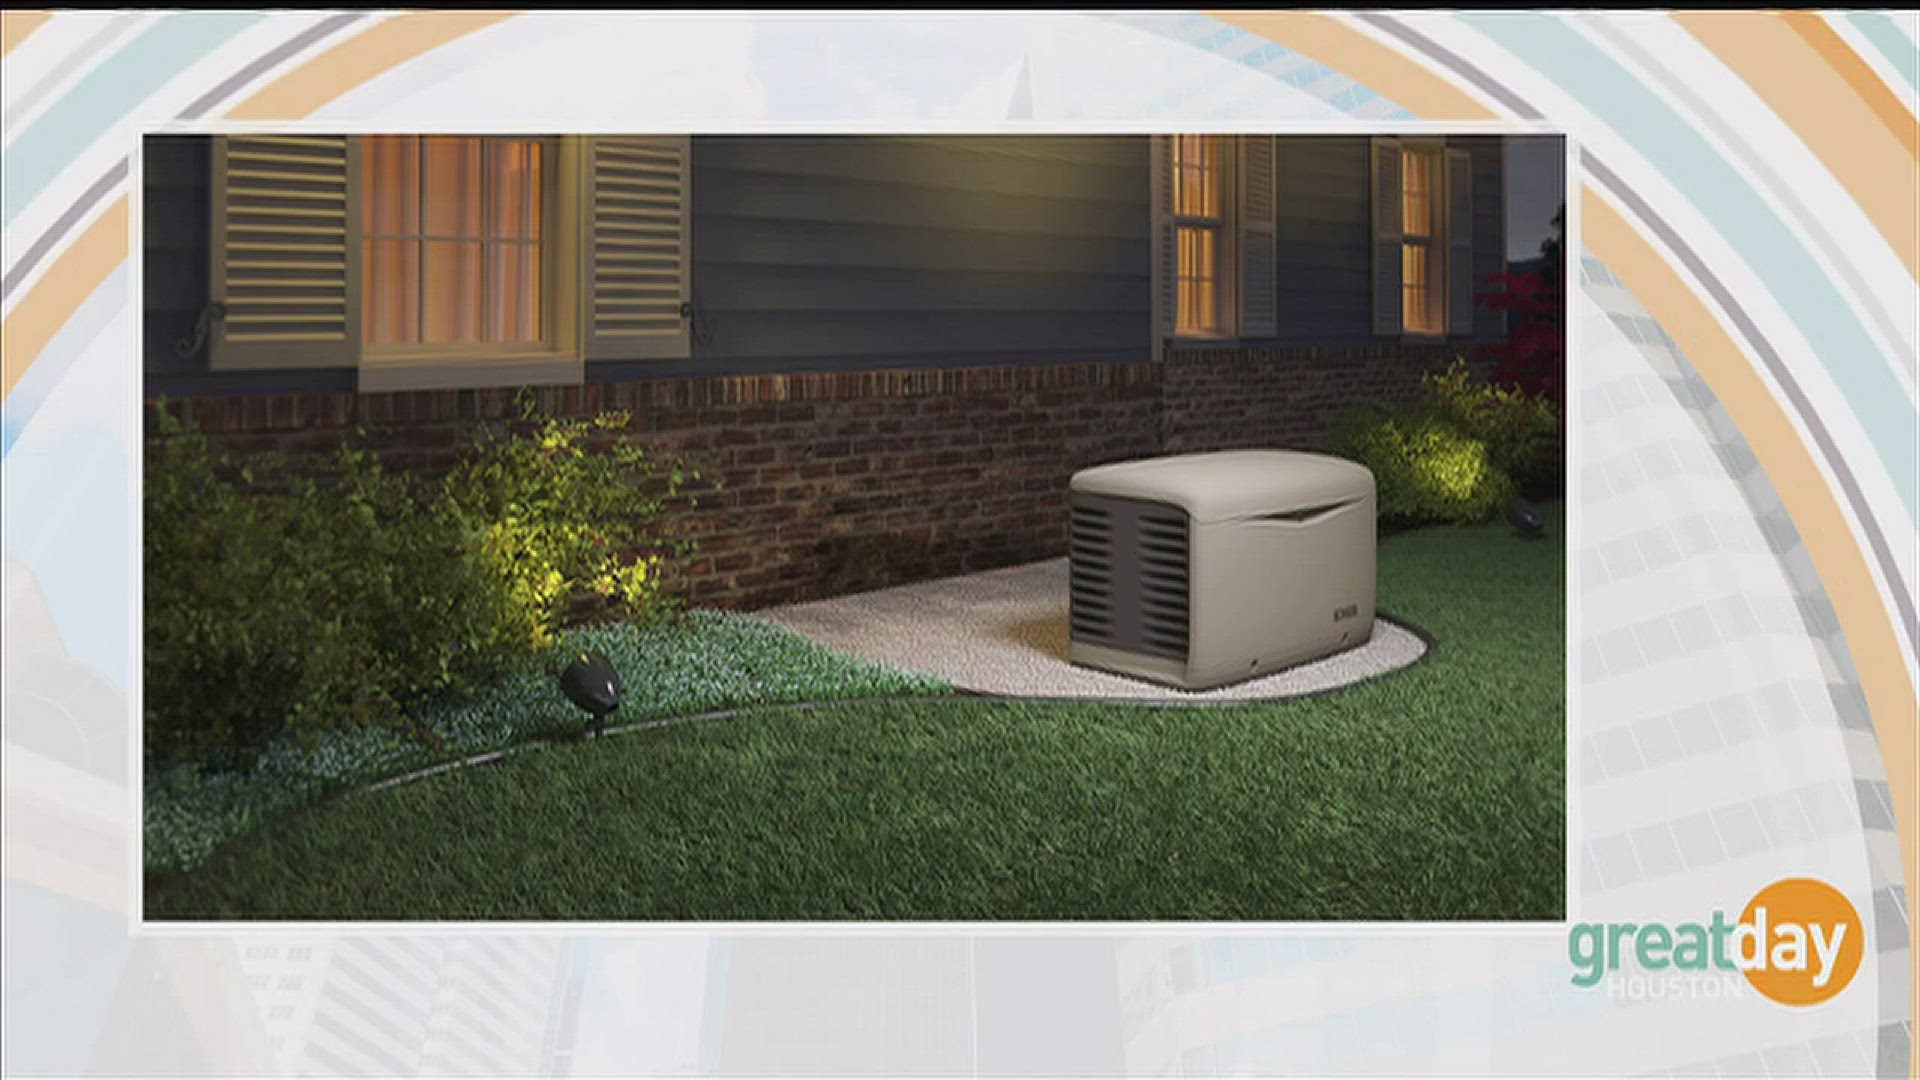 Centerpoint Energy's Natural Gas Standby Generator Program.